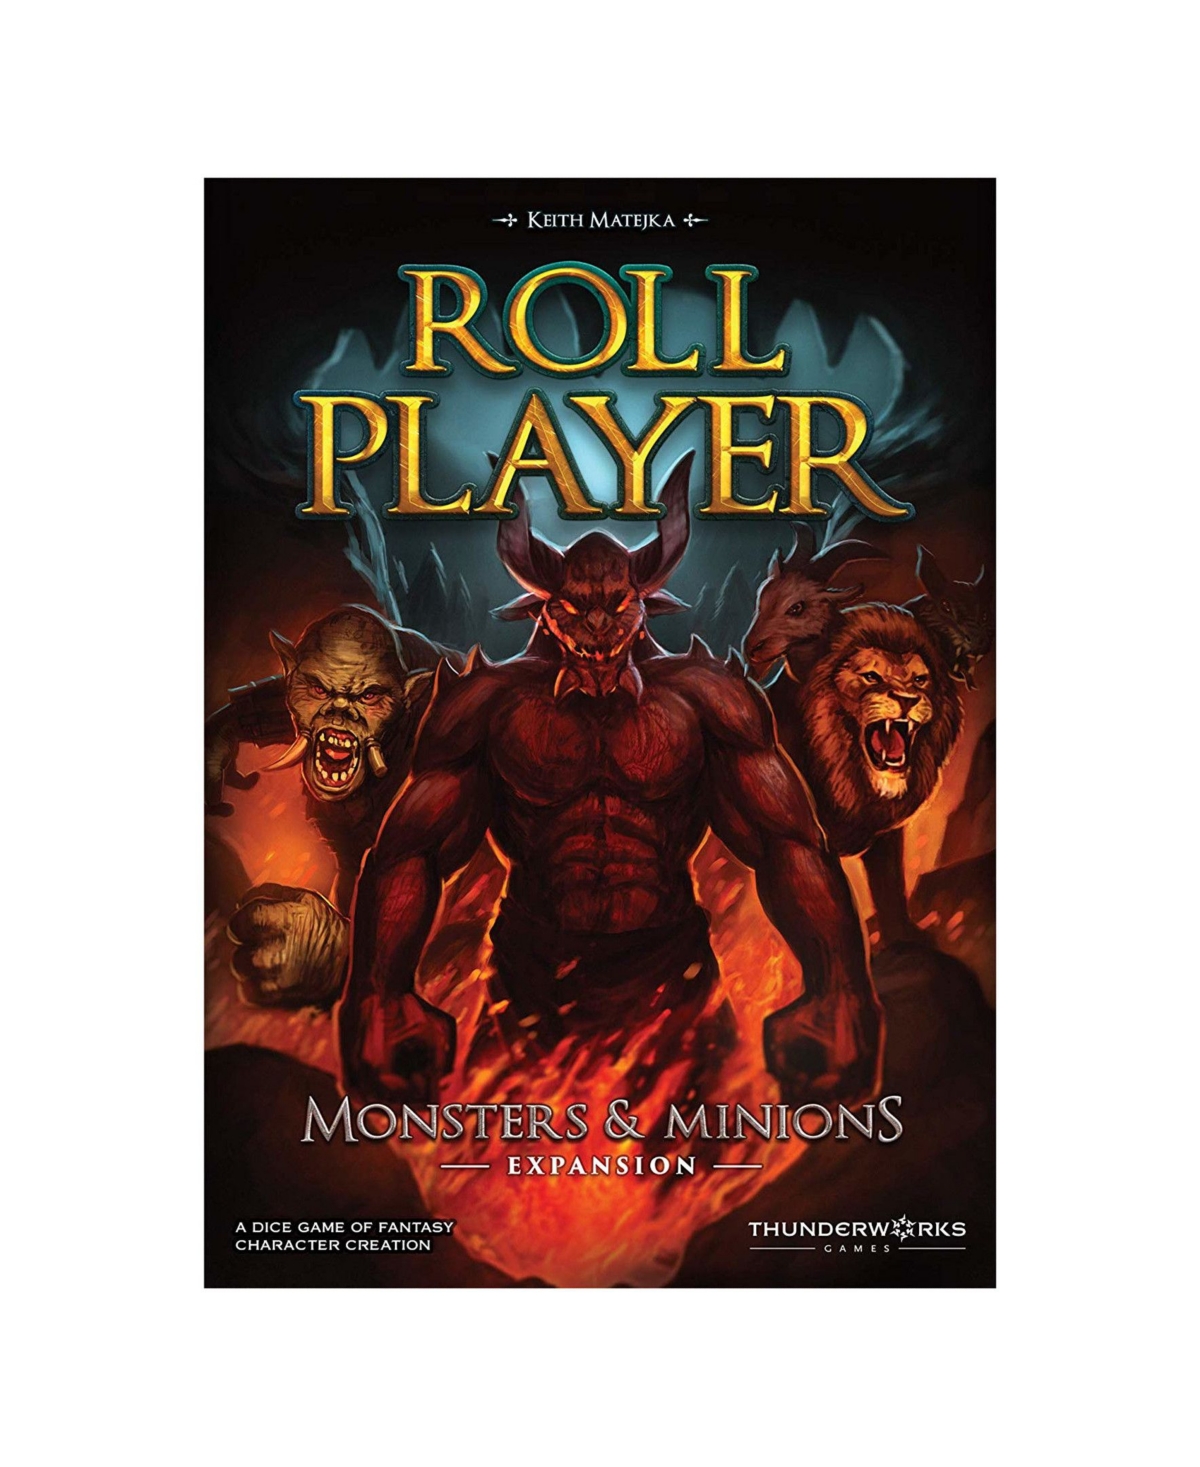 Masterpieces Puzzles Thunderworks Games Roll Player- Monsters Minions Roll Player Exp. In Multi